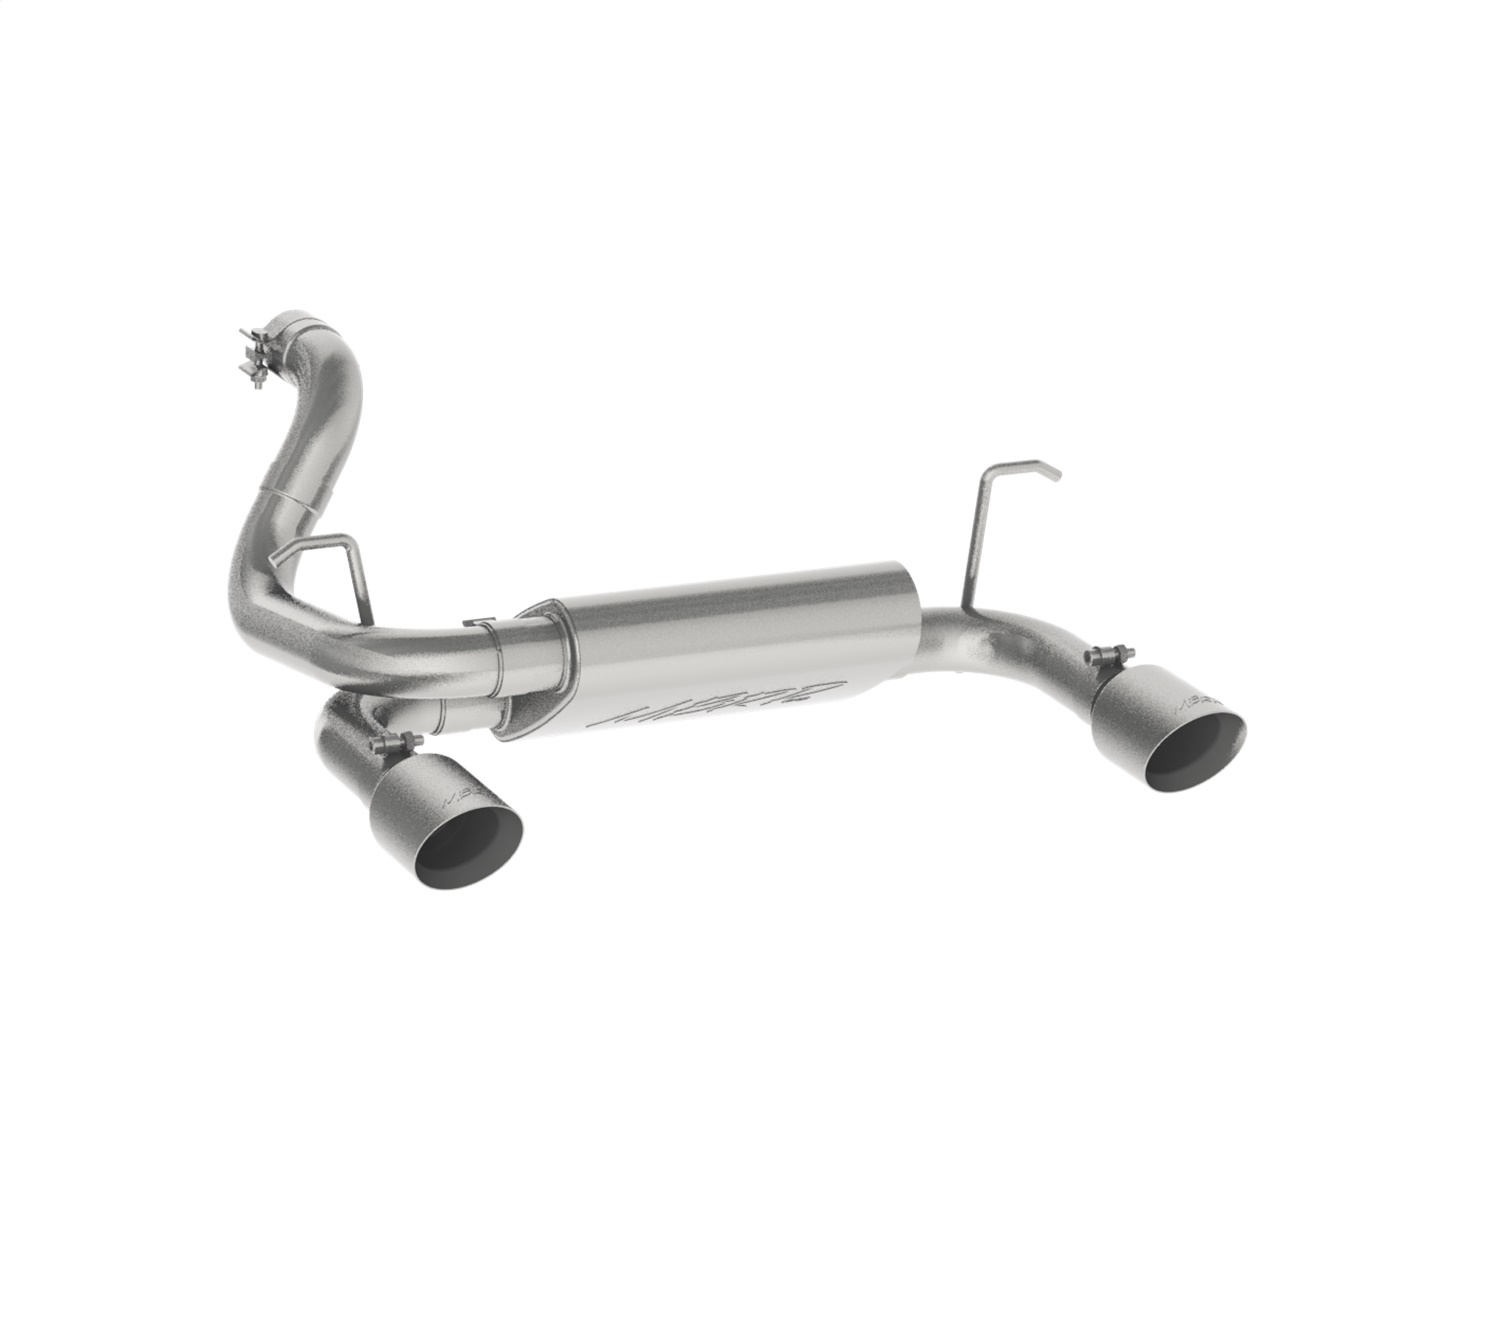 MBRP Exhaust S5529409 Armor Plus Axle Back Exhaust System Fits Wrangler (JL)